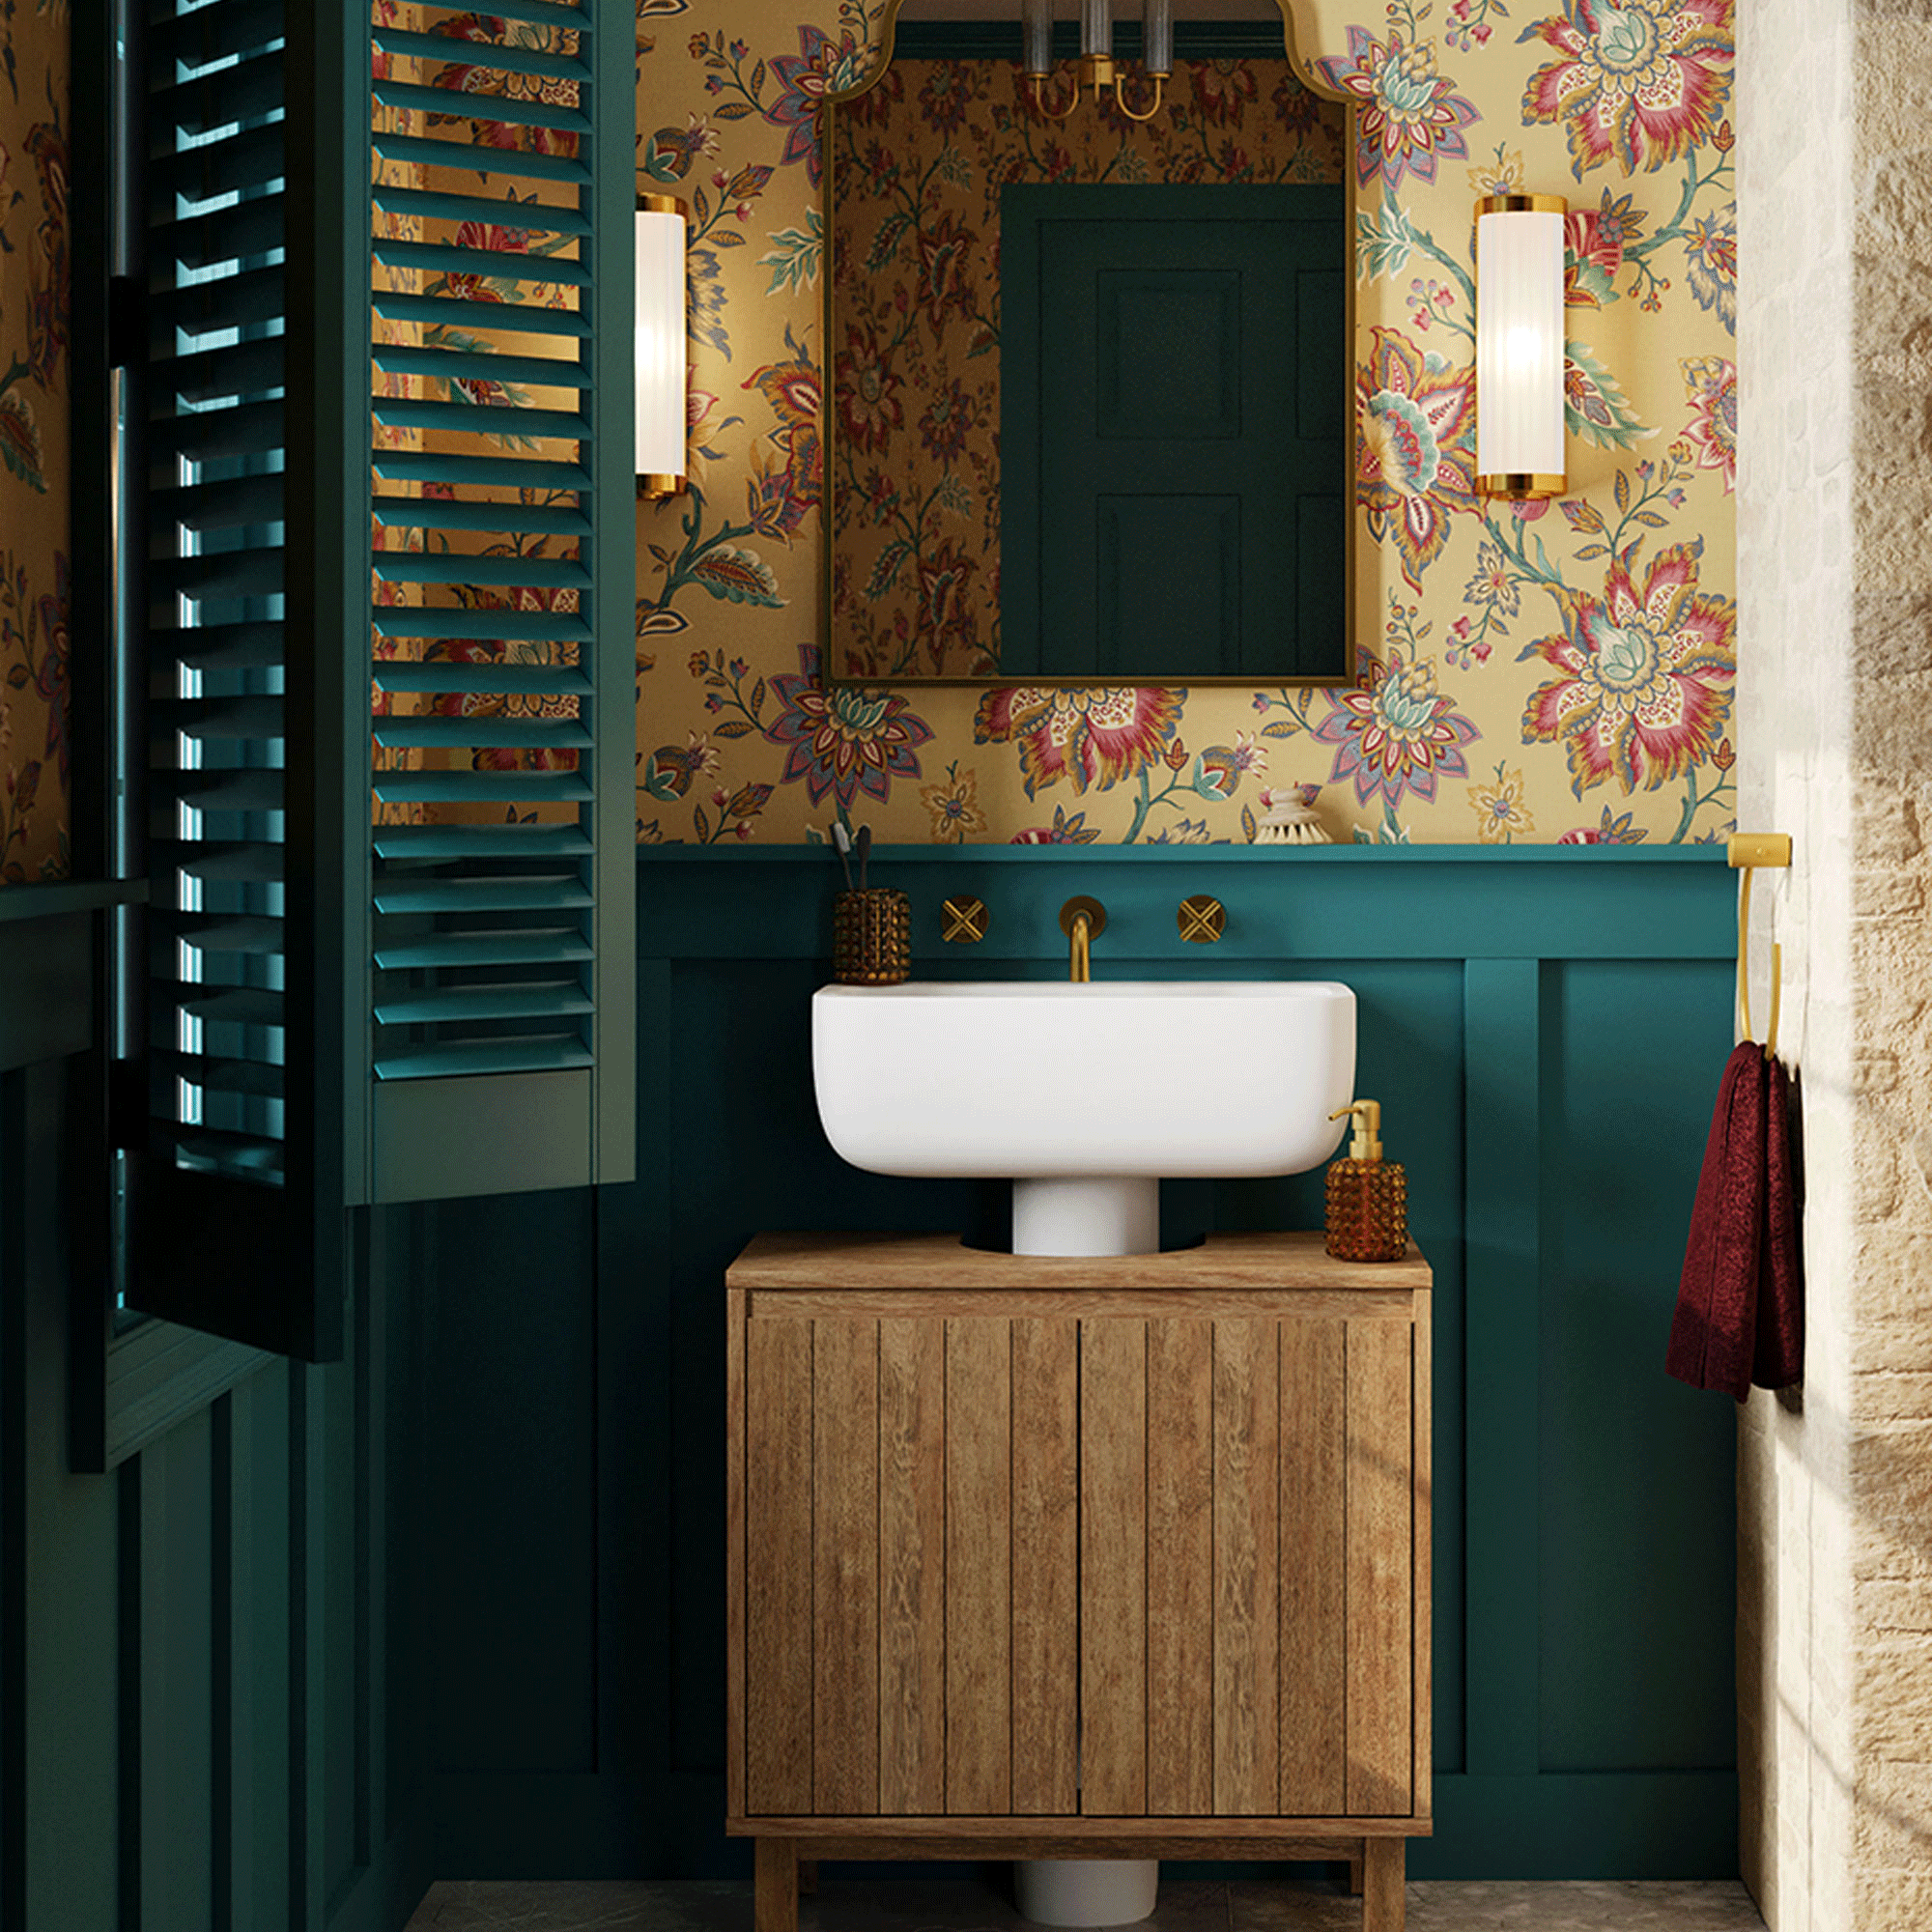 How to add character to a bathroom – 10 easy ways to inject individual style